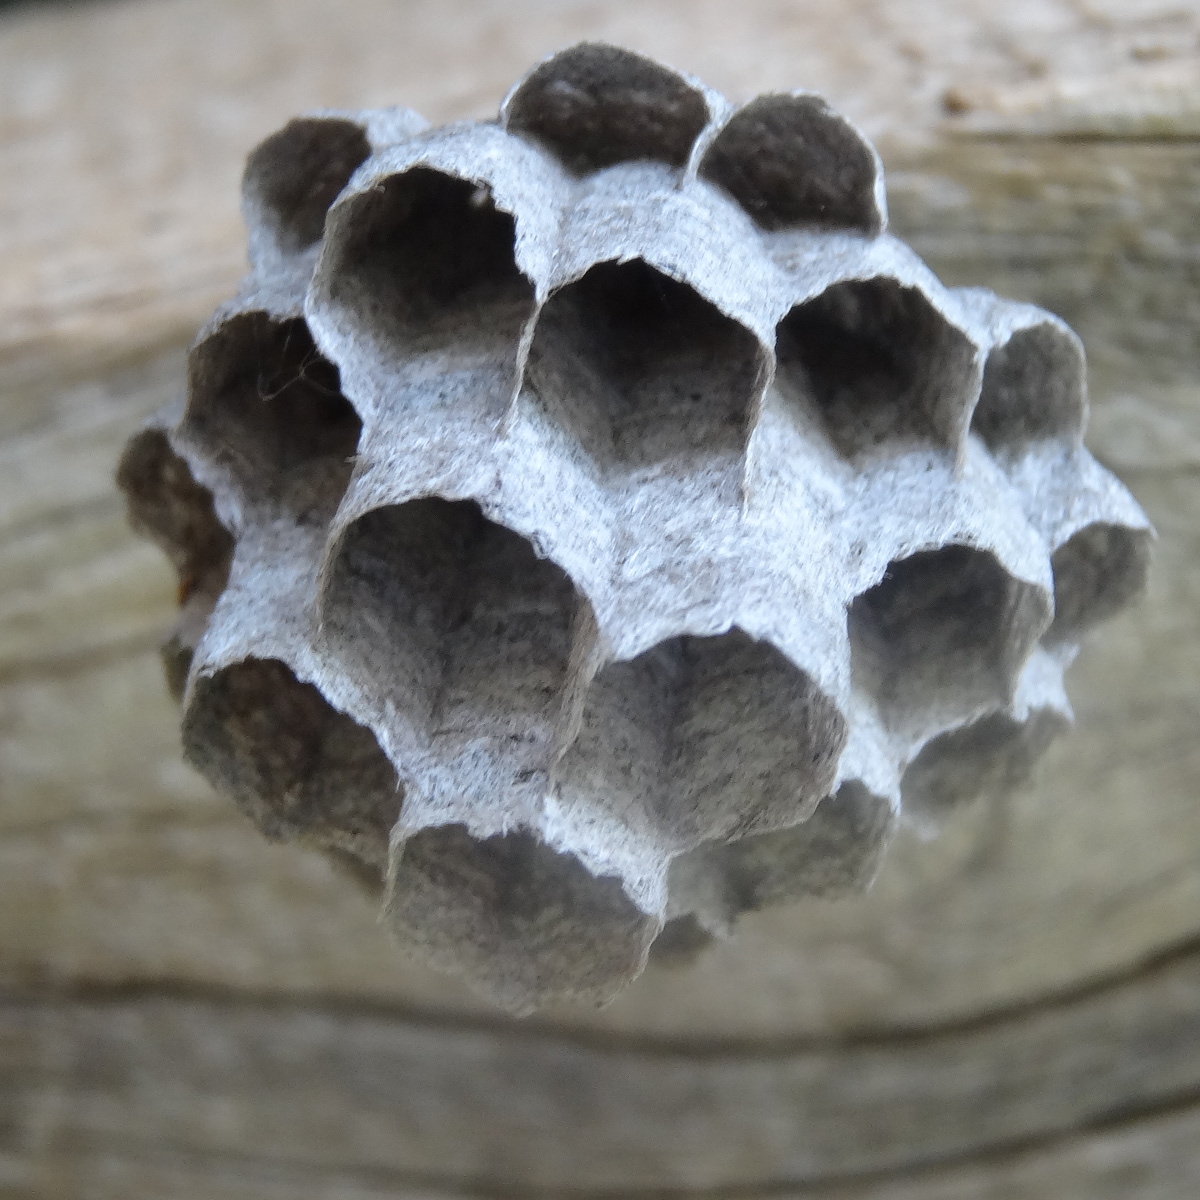 Common paper wasp nest